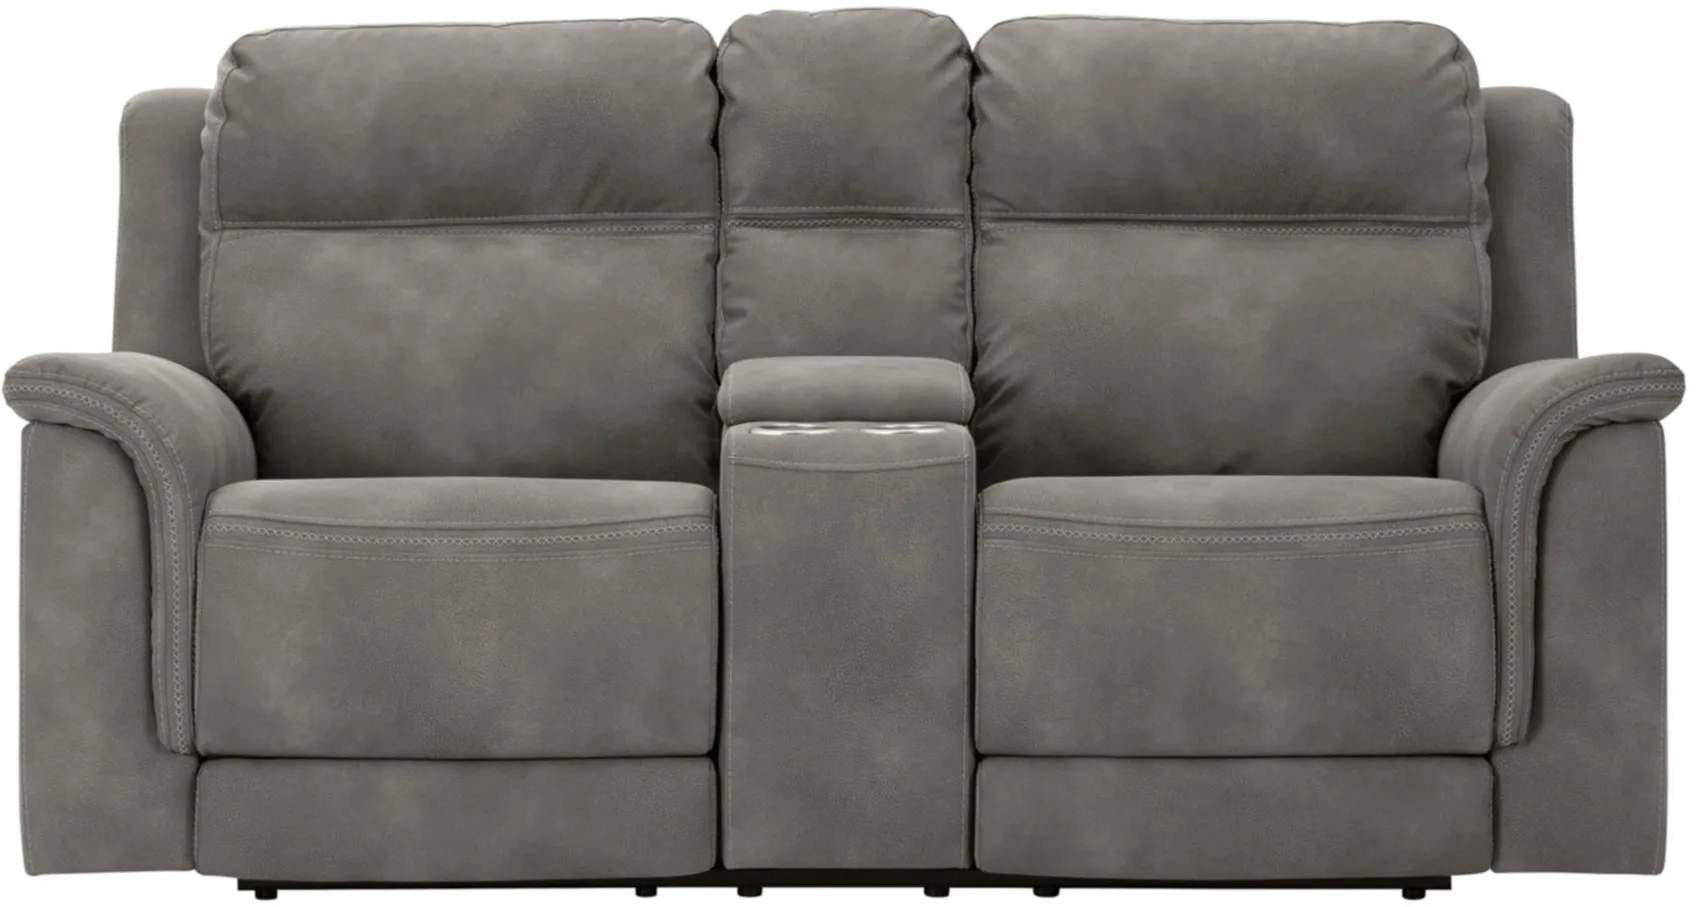 Durapella Power Reclining Console Loveseat in Slate by Ashley Furniture